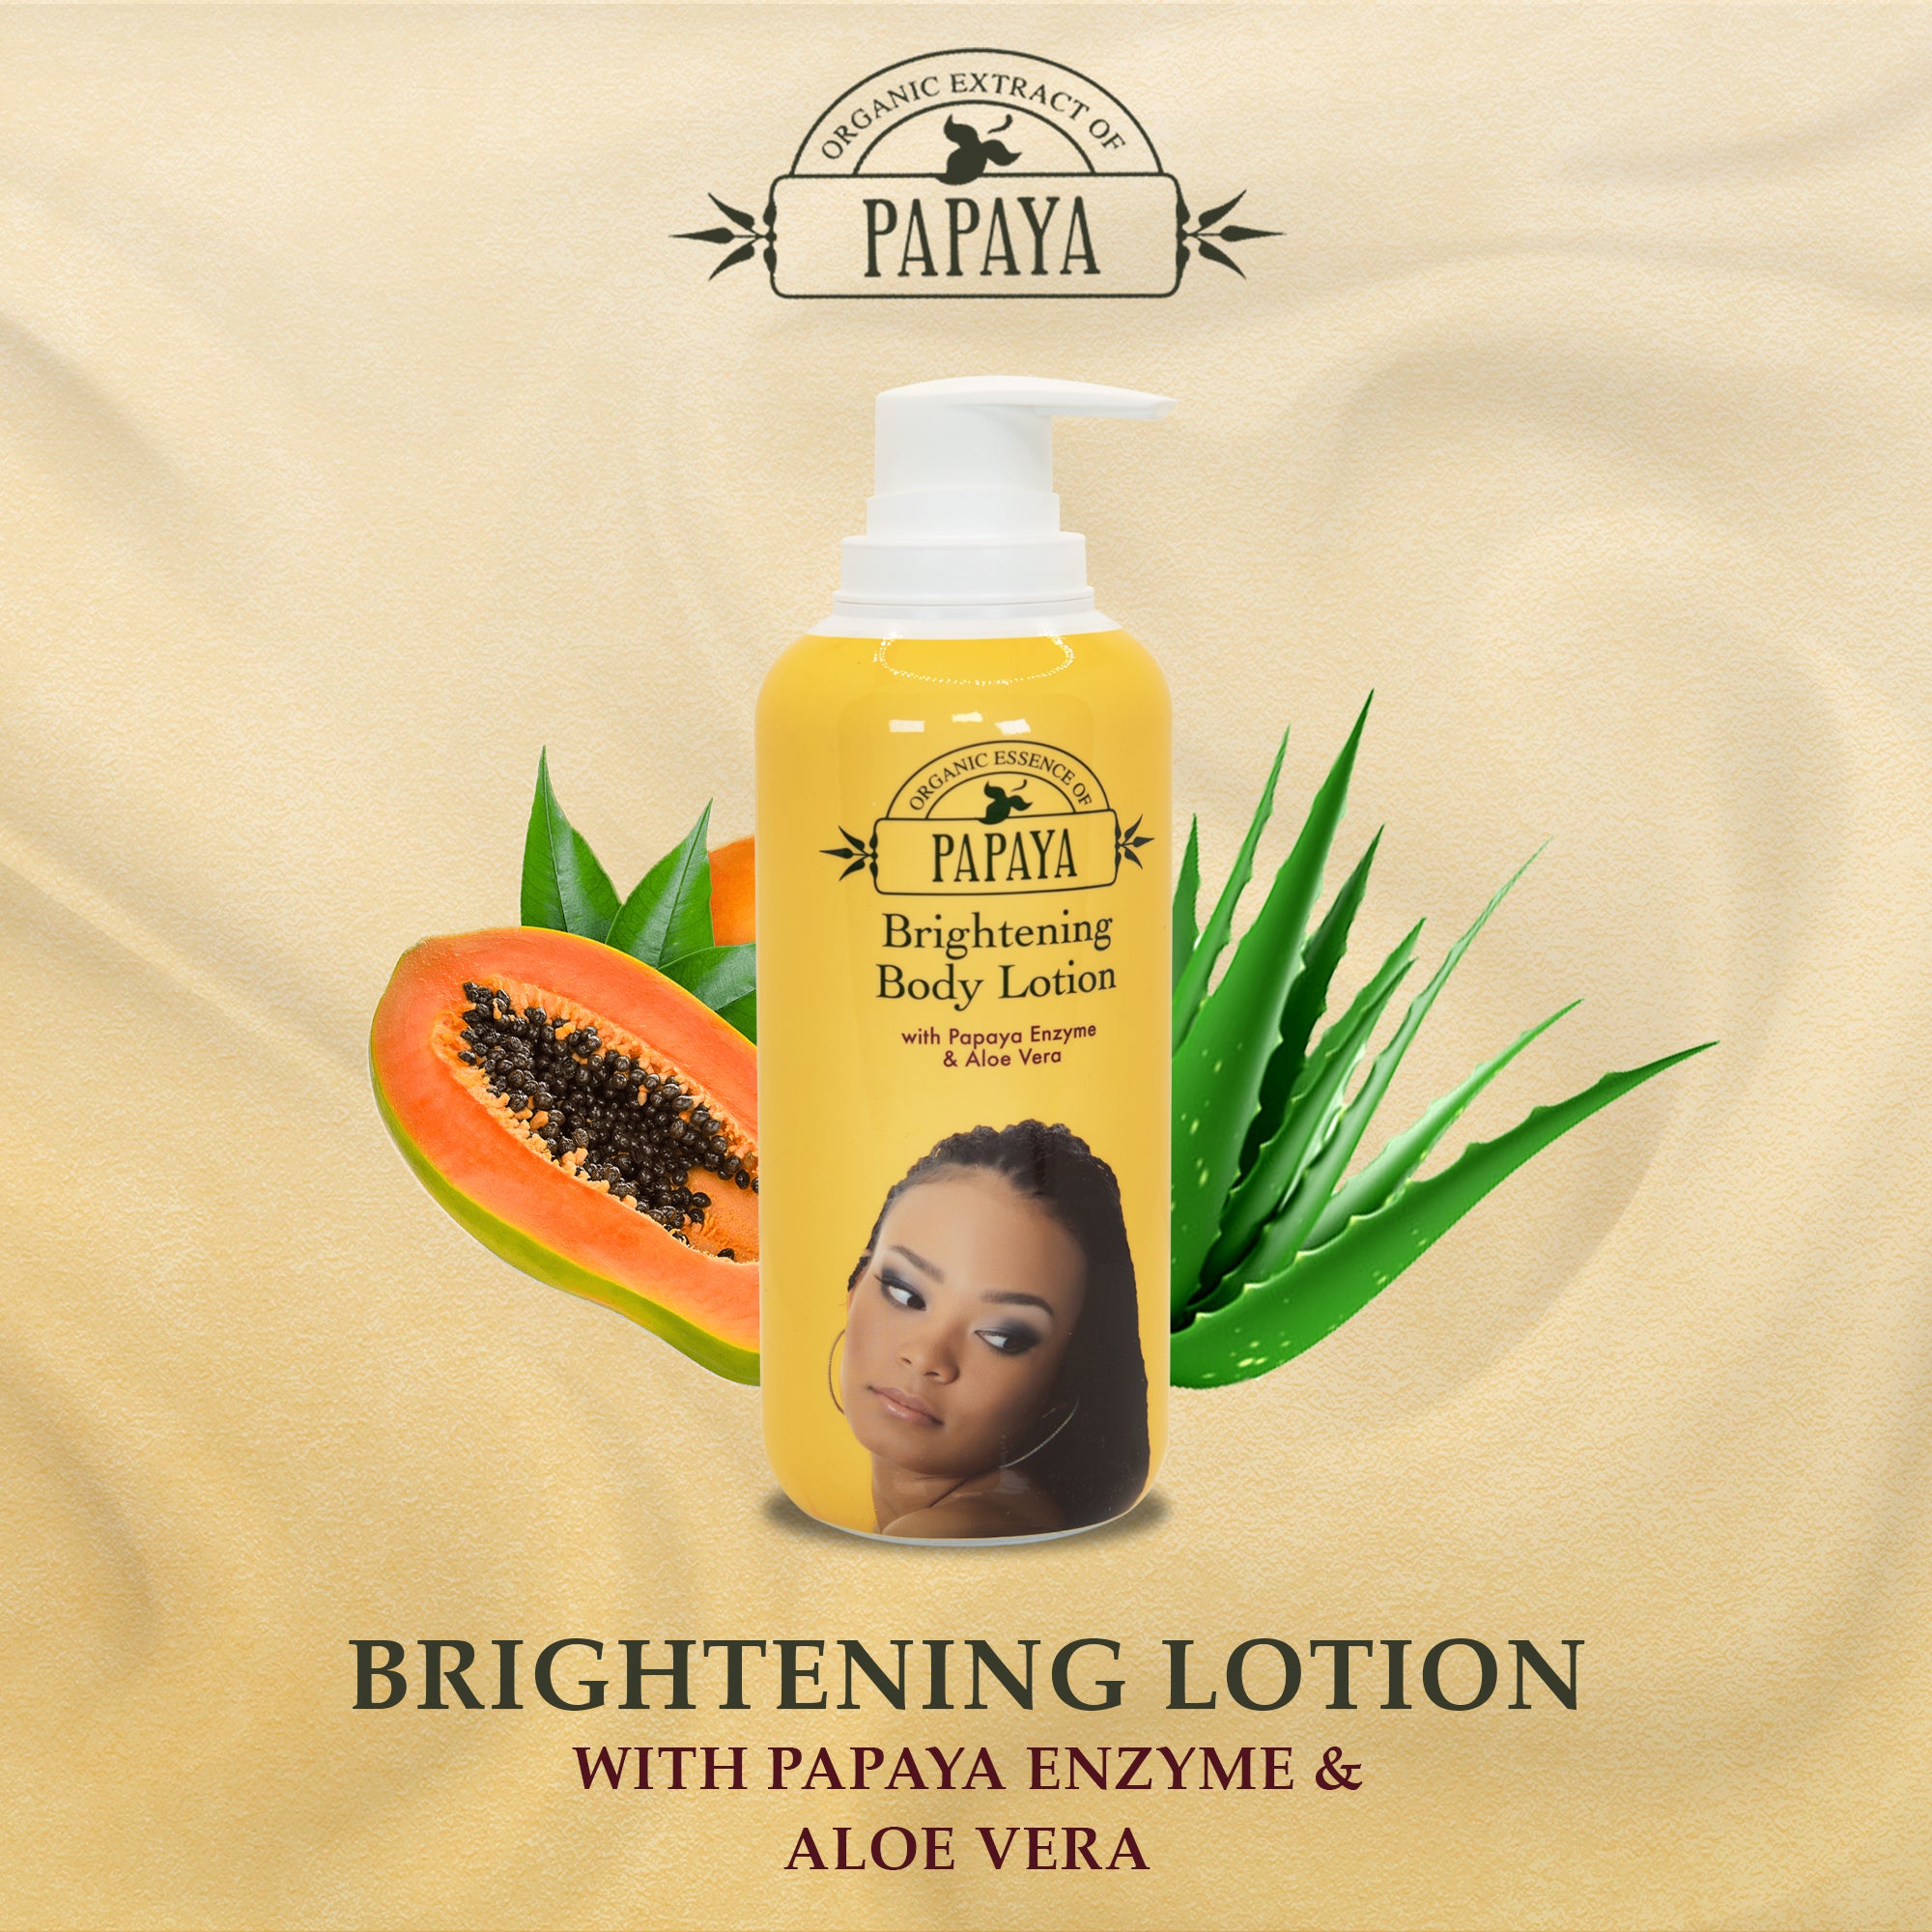 Organic Extract of Papaya Brightening Body Lotion - 400ml mitchellbrands - Mitchell Brands - Skin Lightening, Skin Brightening, Fade Dark Spots, Shea Butter, Hair Growth Products